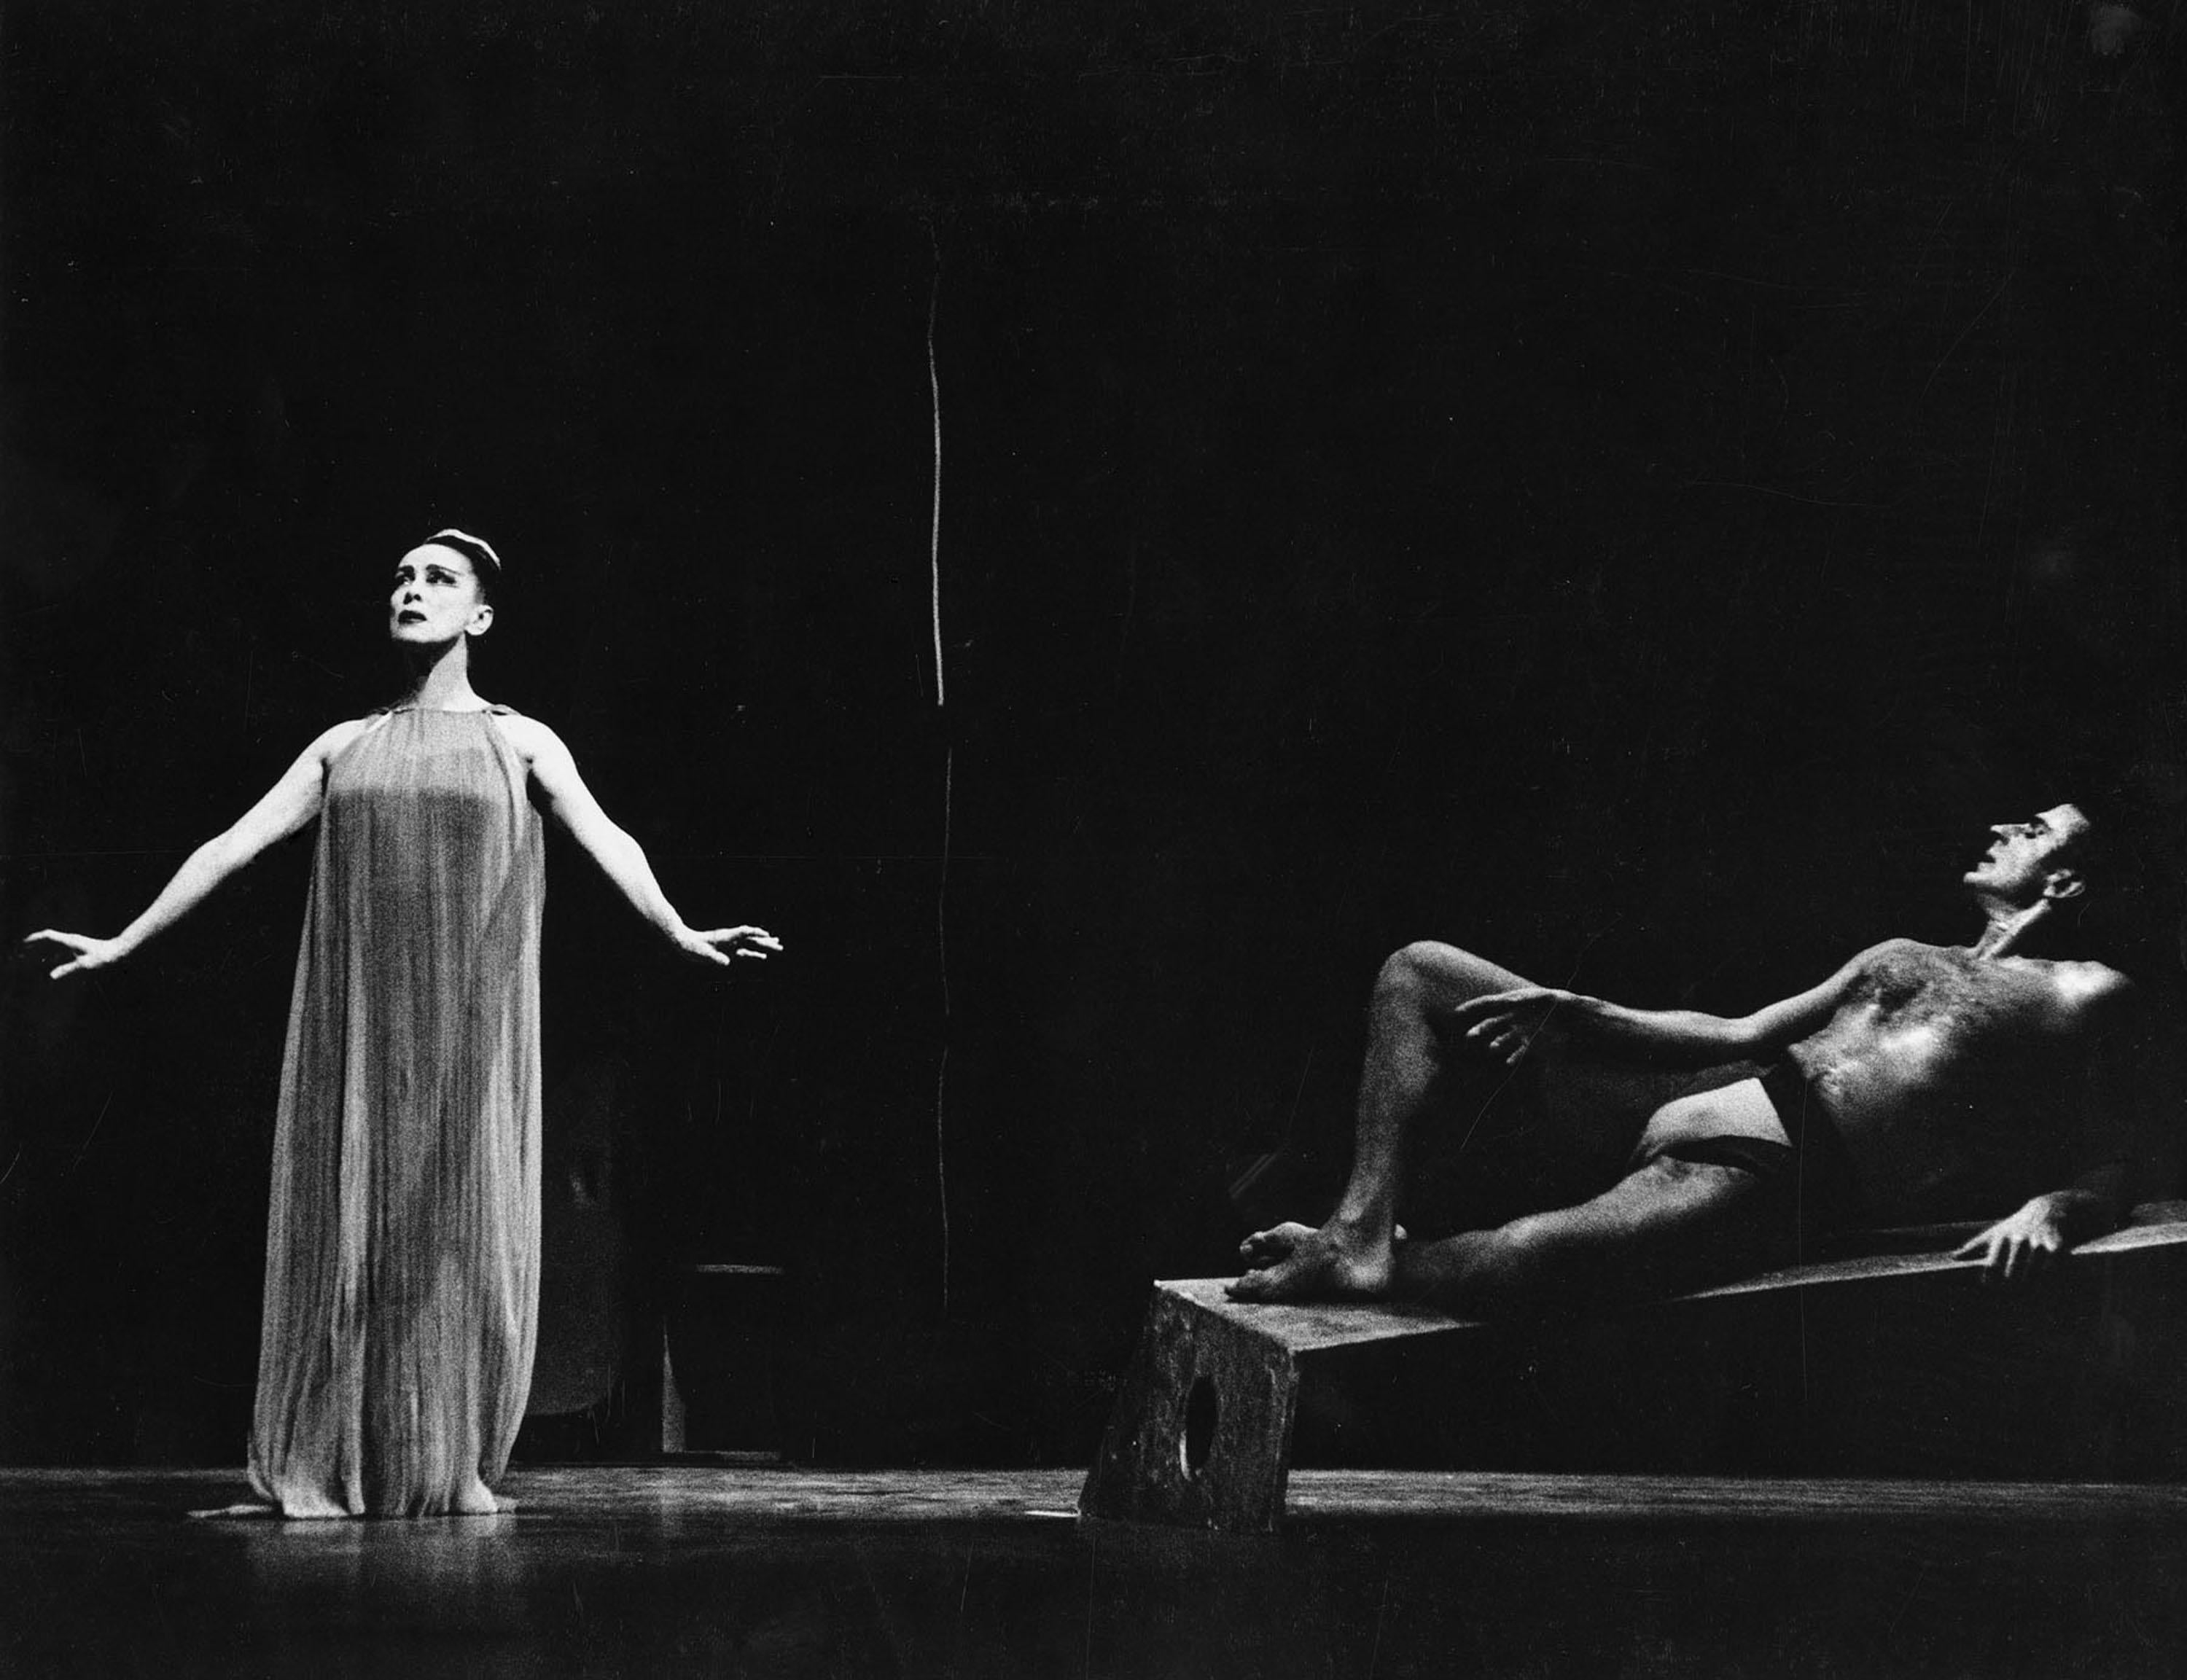 11 x 14" vintage silver gelatin photograph of Martha Graham and Bertram Ross performing "Phaedra", 1962. This photograph was published in Jack's book "American Dance Portfolio" in 1964. Signed by Jack Mitchell on the print verso. Comes directly from